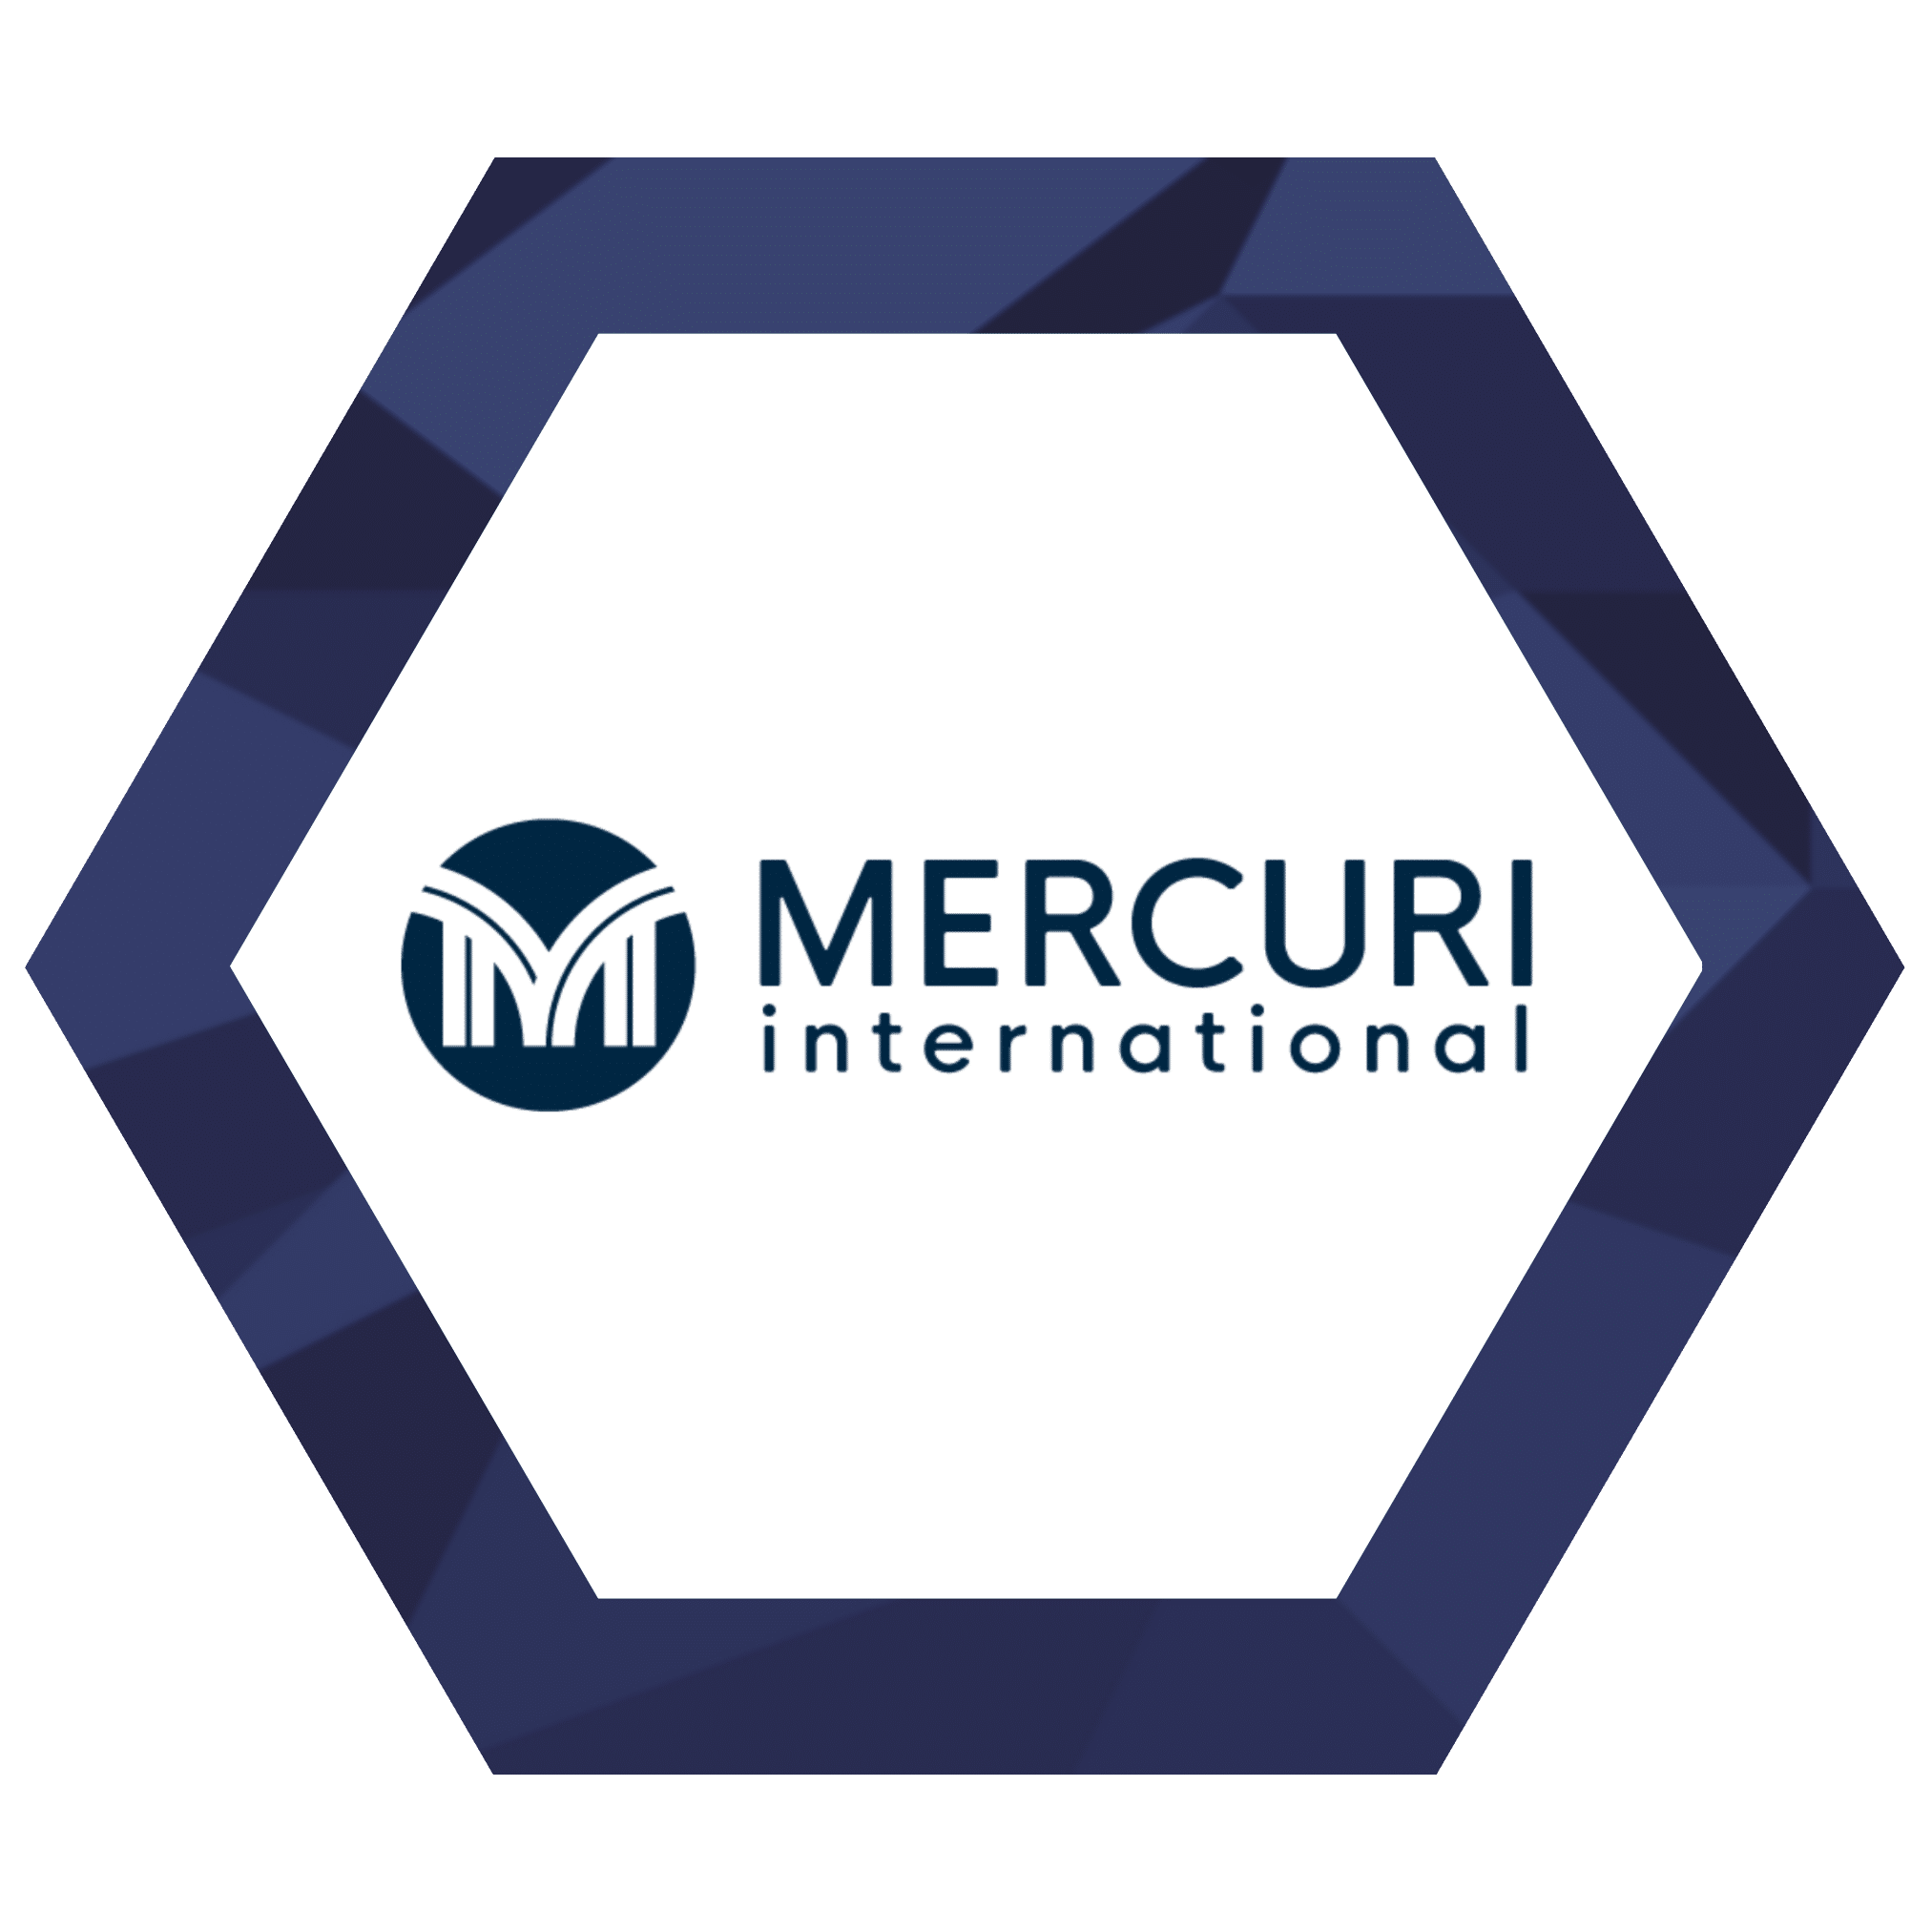 Picture of the Mercuri International logo, one of the breakout sessions at AET